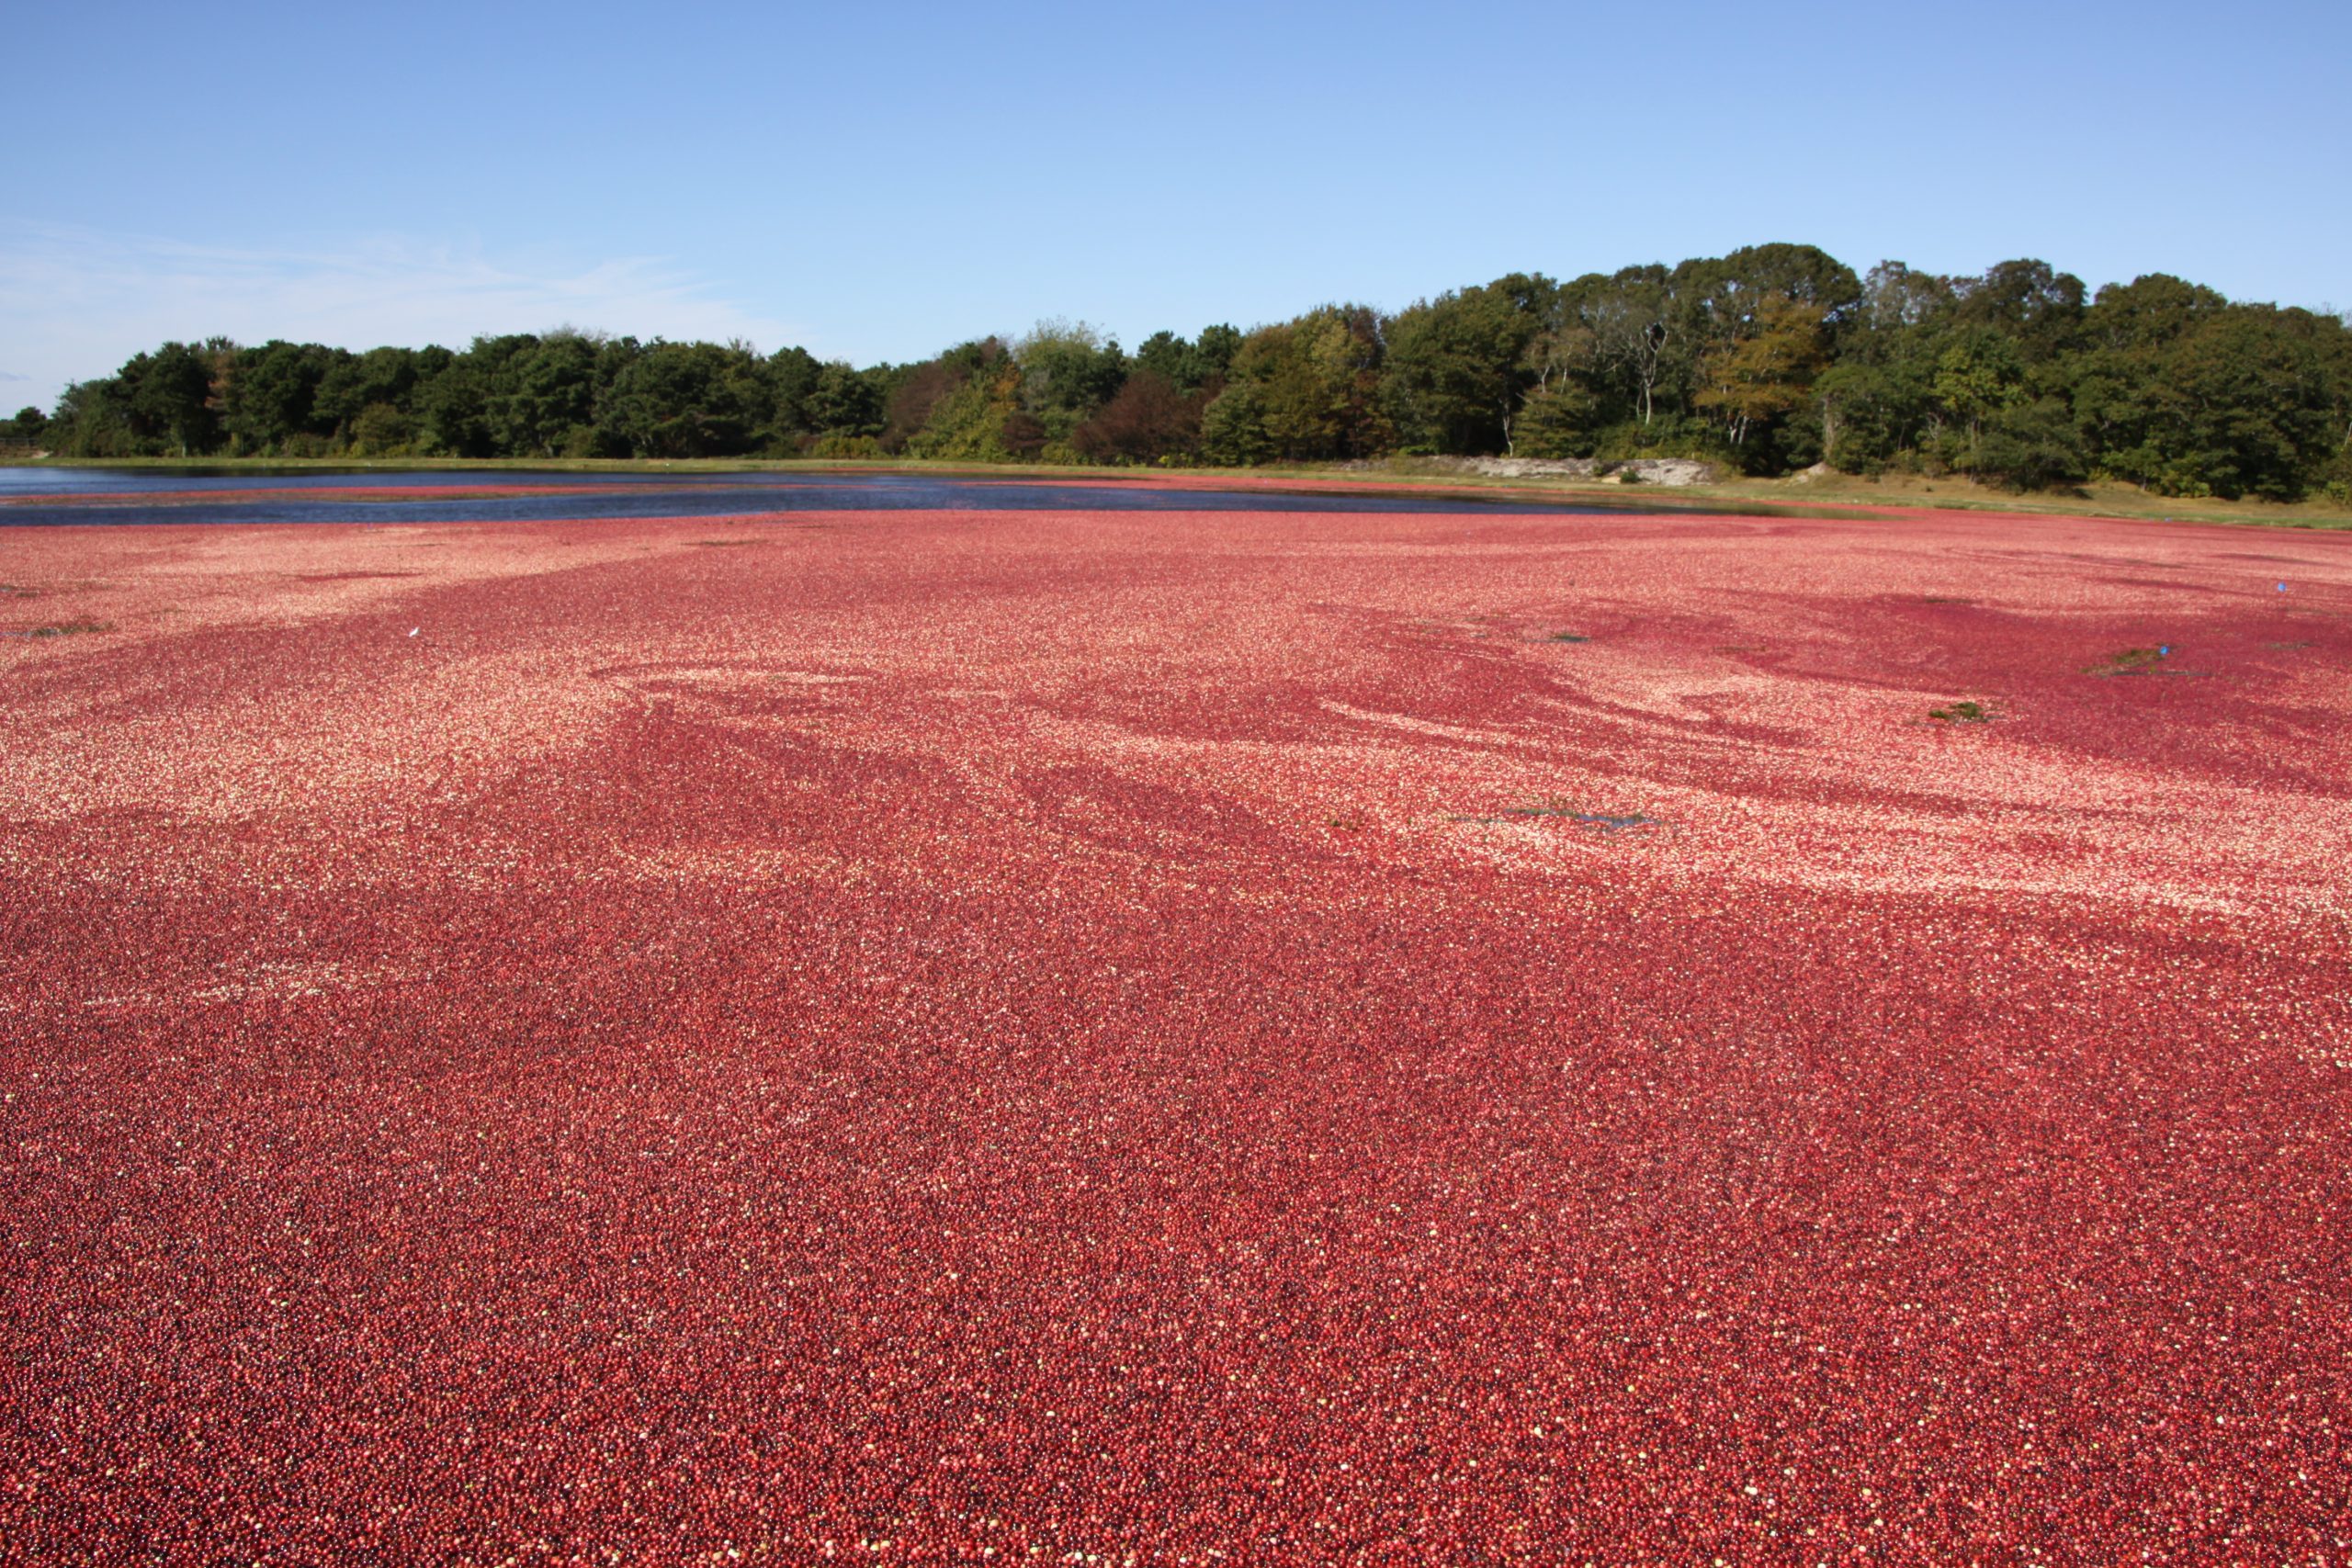 Cranberry Harvest (user submitted)